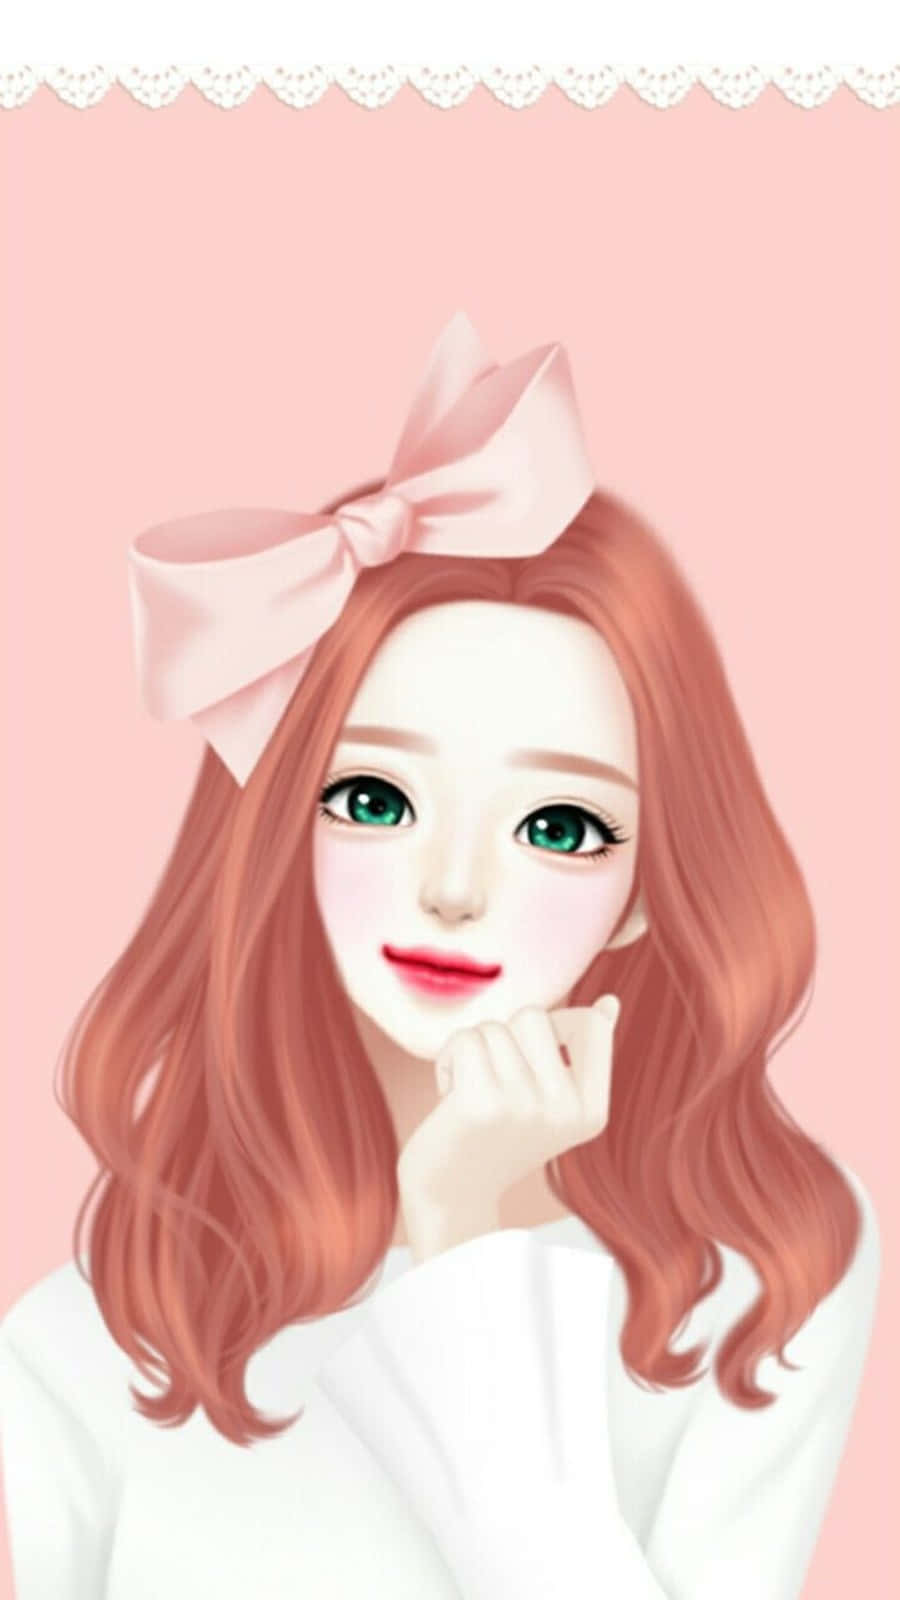 Korean Anime Girl With Pink Bow On Head Background